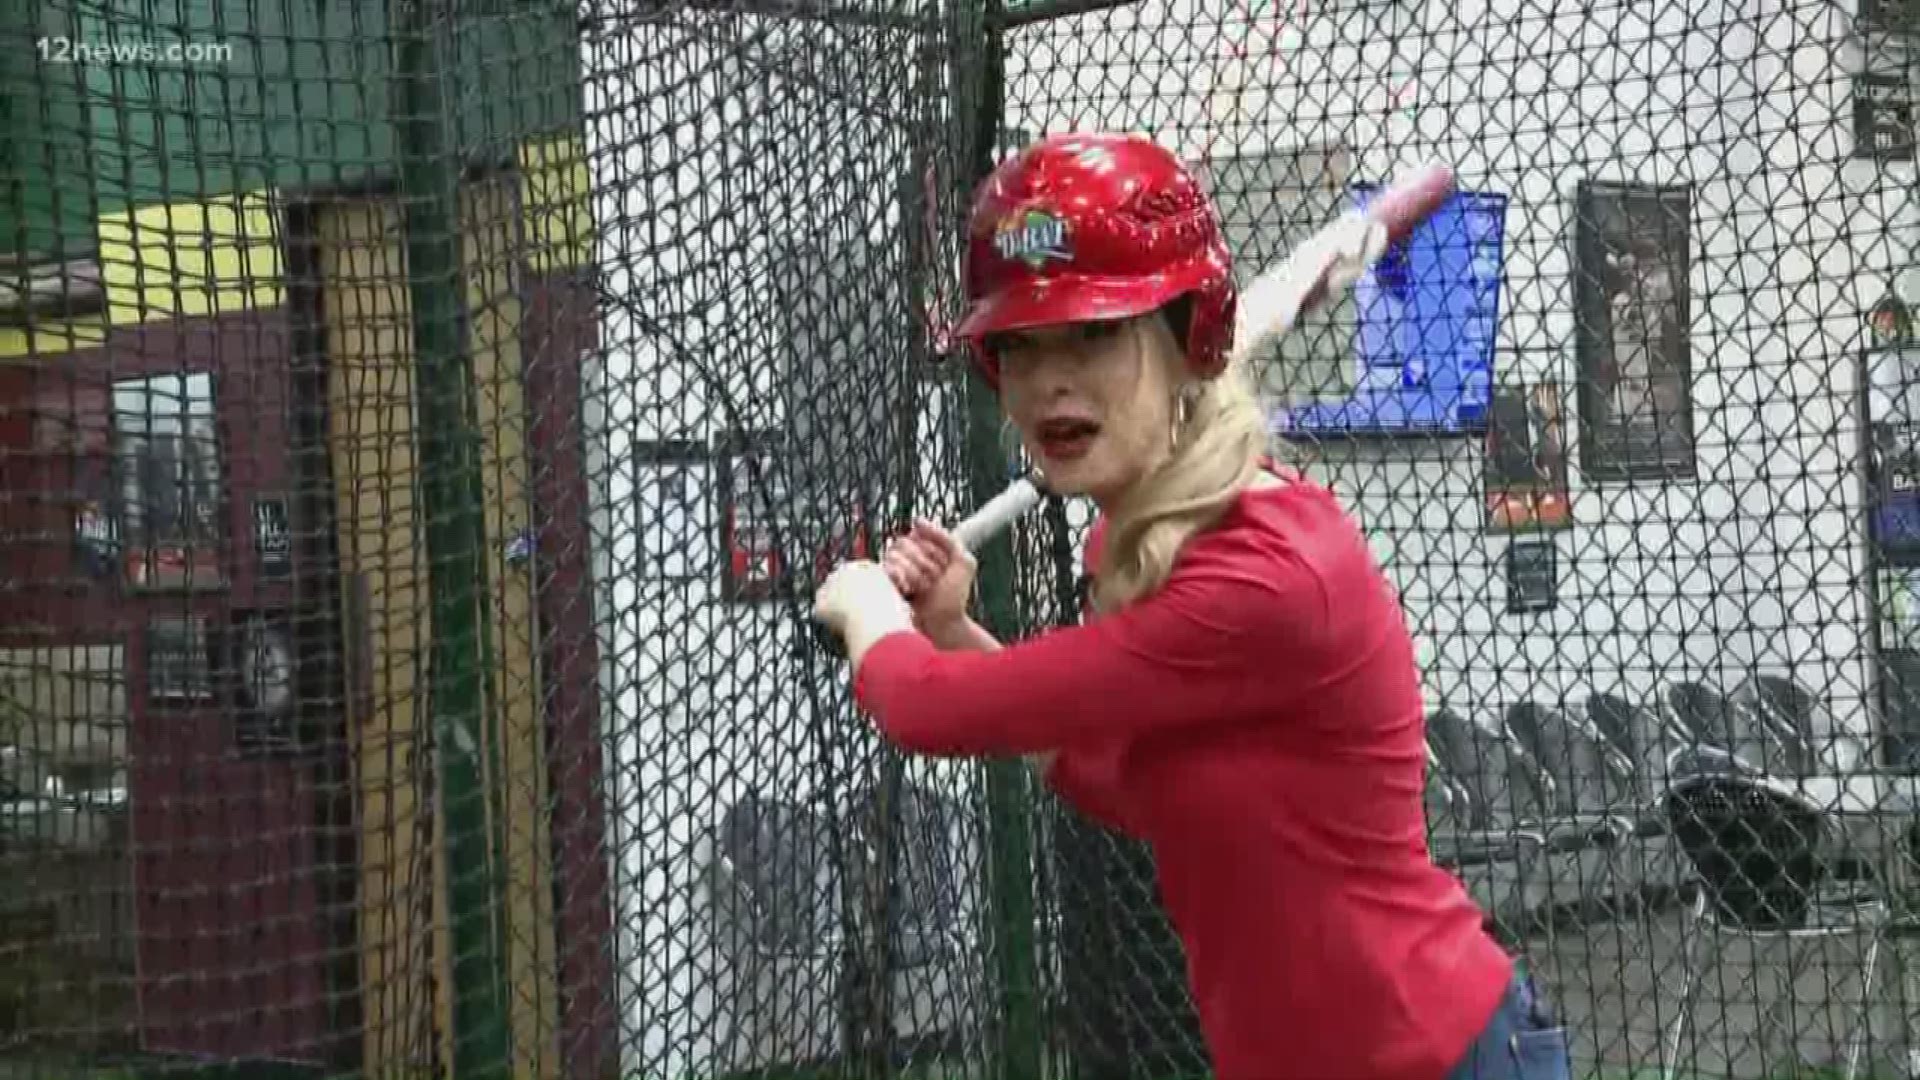 We are your Cactus League connection and we are giving you plenty of options to enjoy spring training. First up to bat is D-Bat Batting Cages in Peoria where we learn how to swing a bat like a pro.